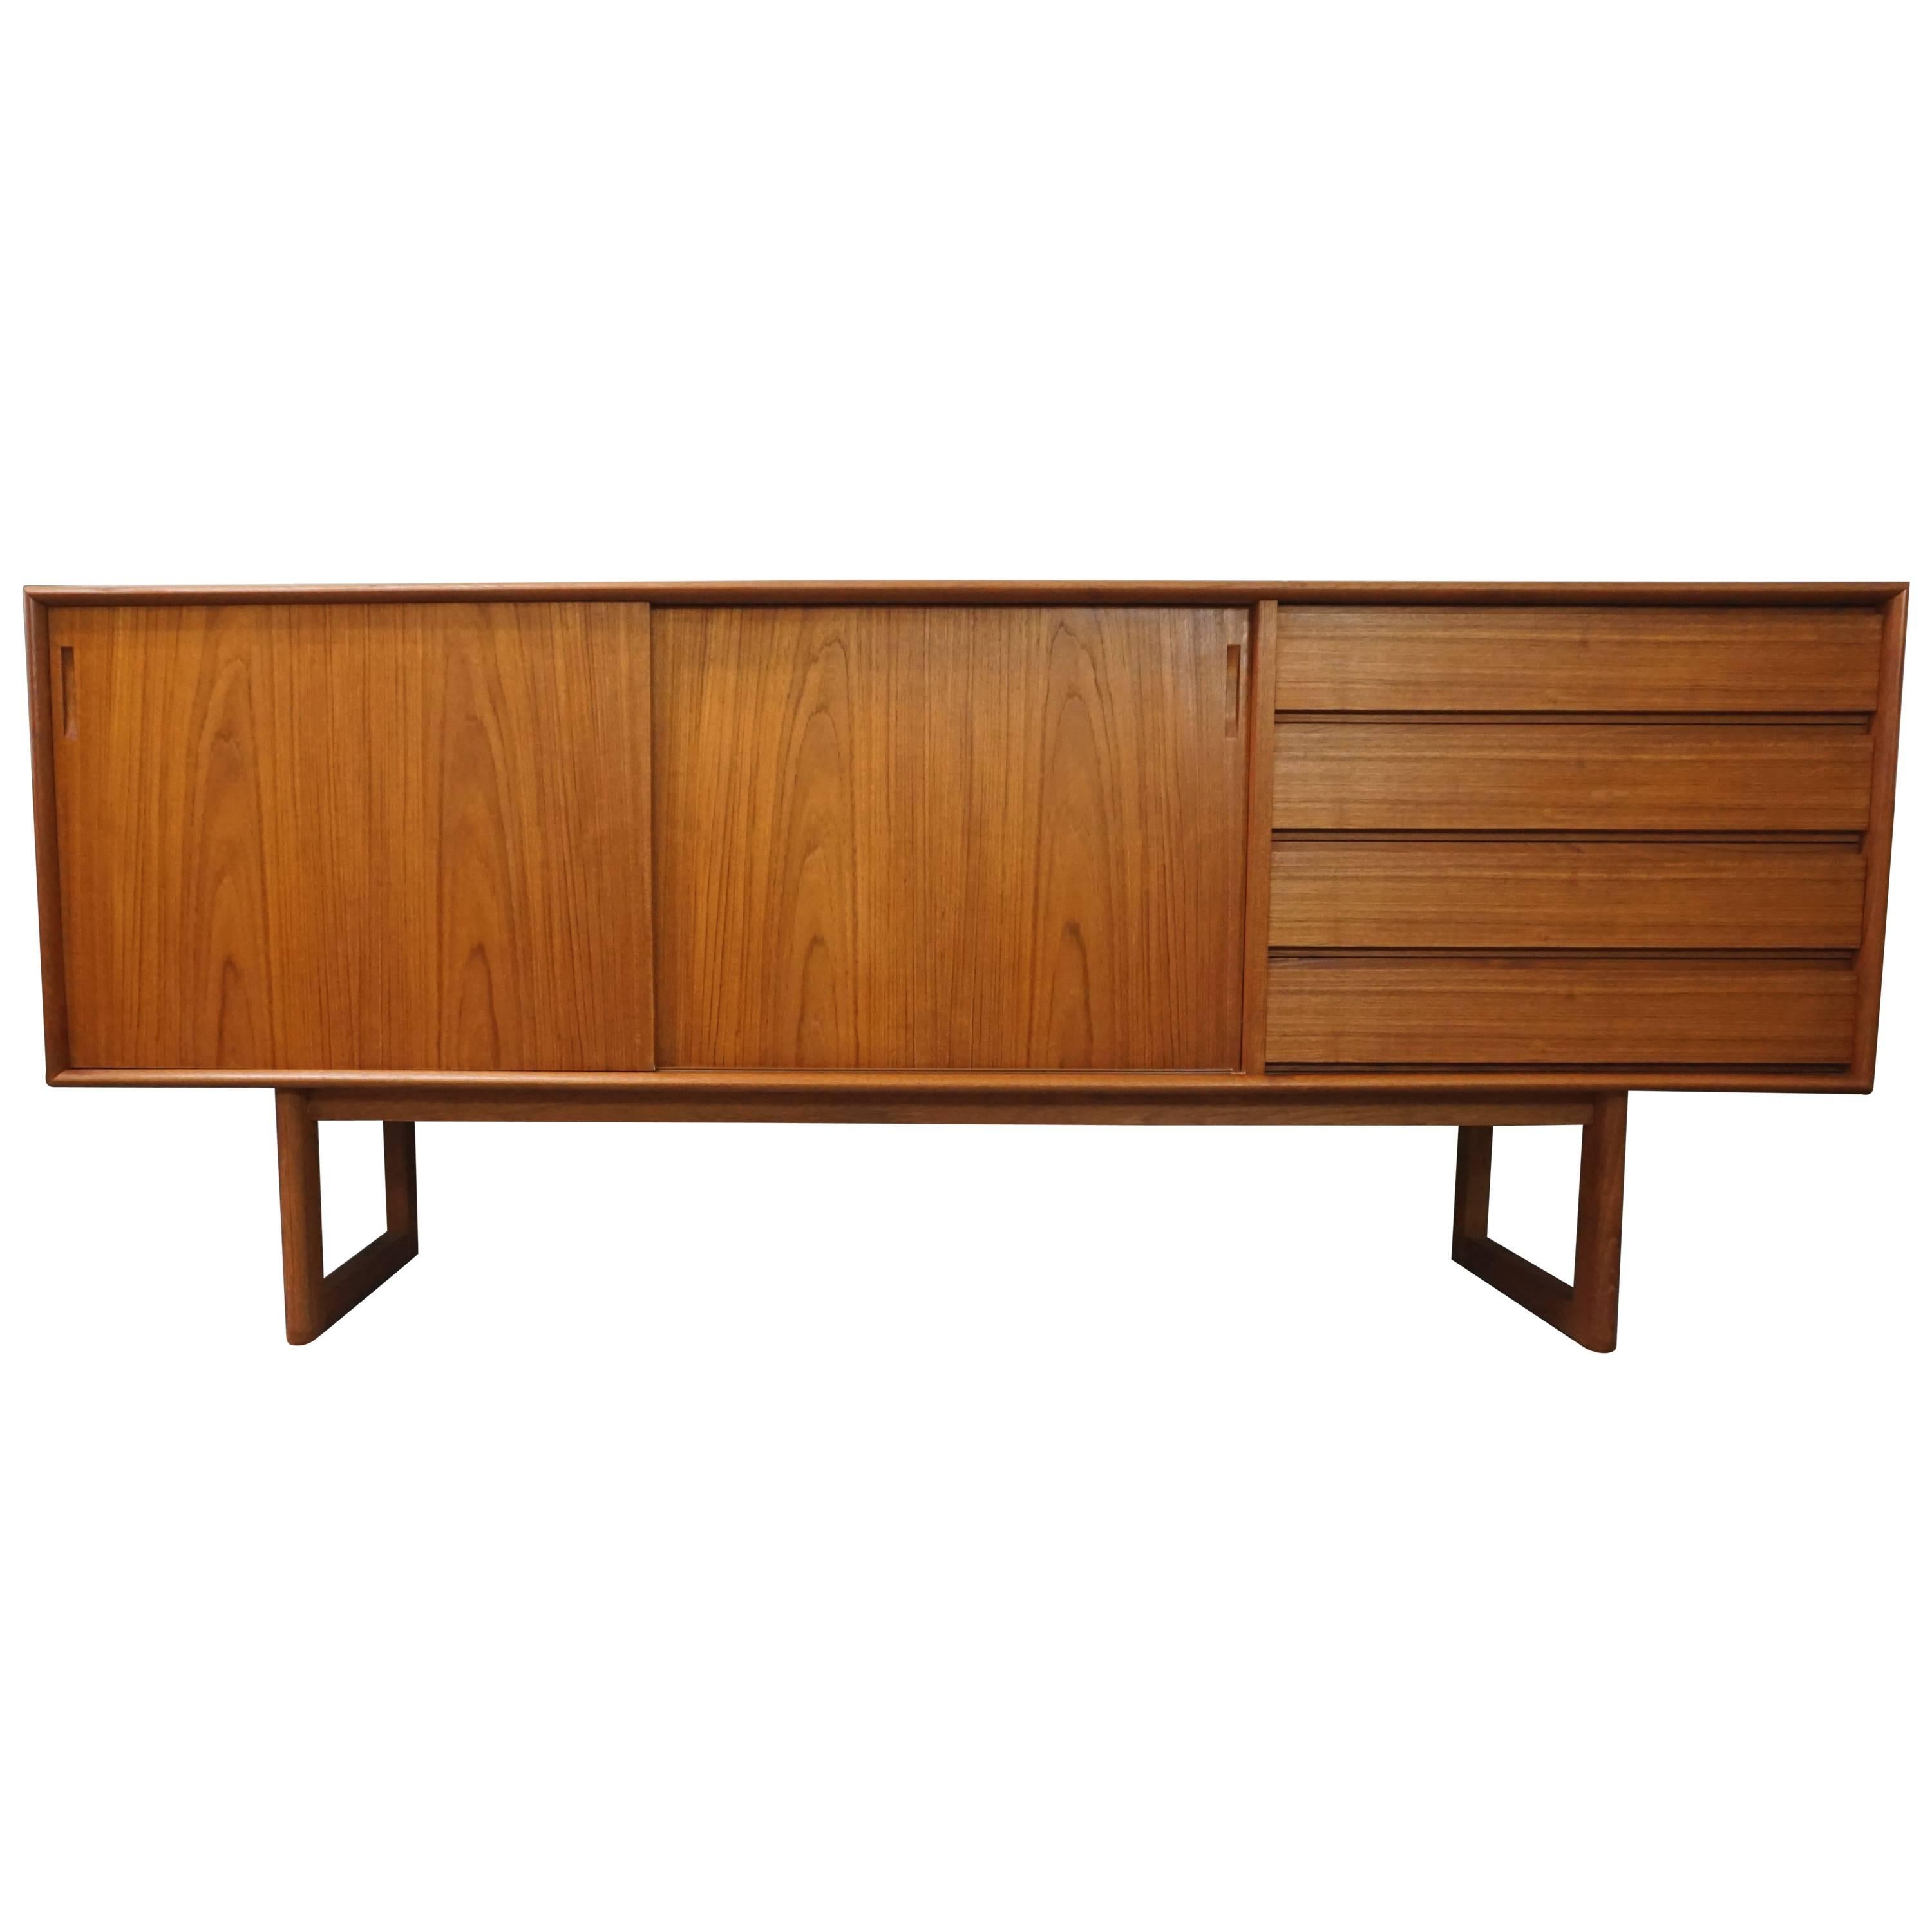 Danish Teak Credenza with Two Doors and Drawers